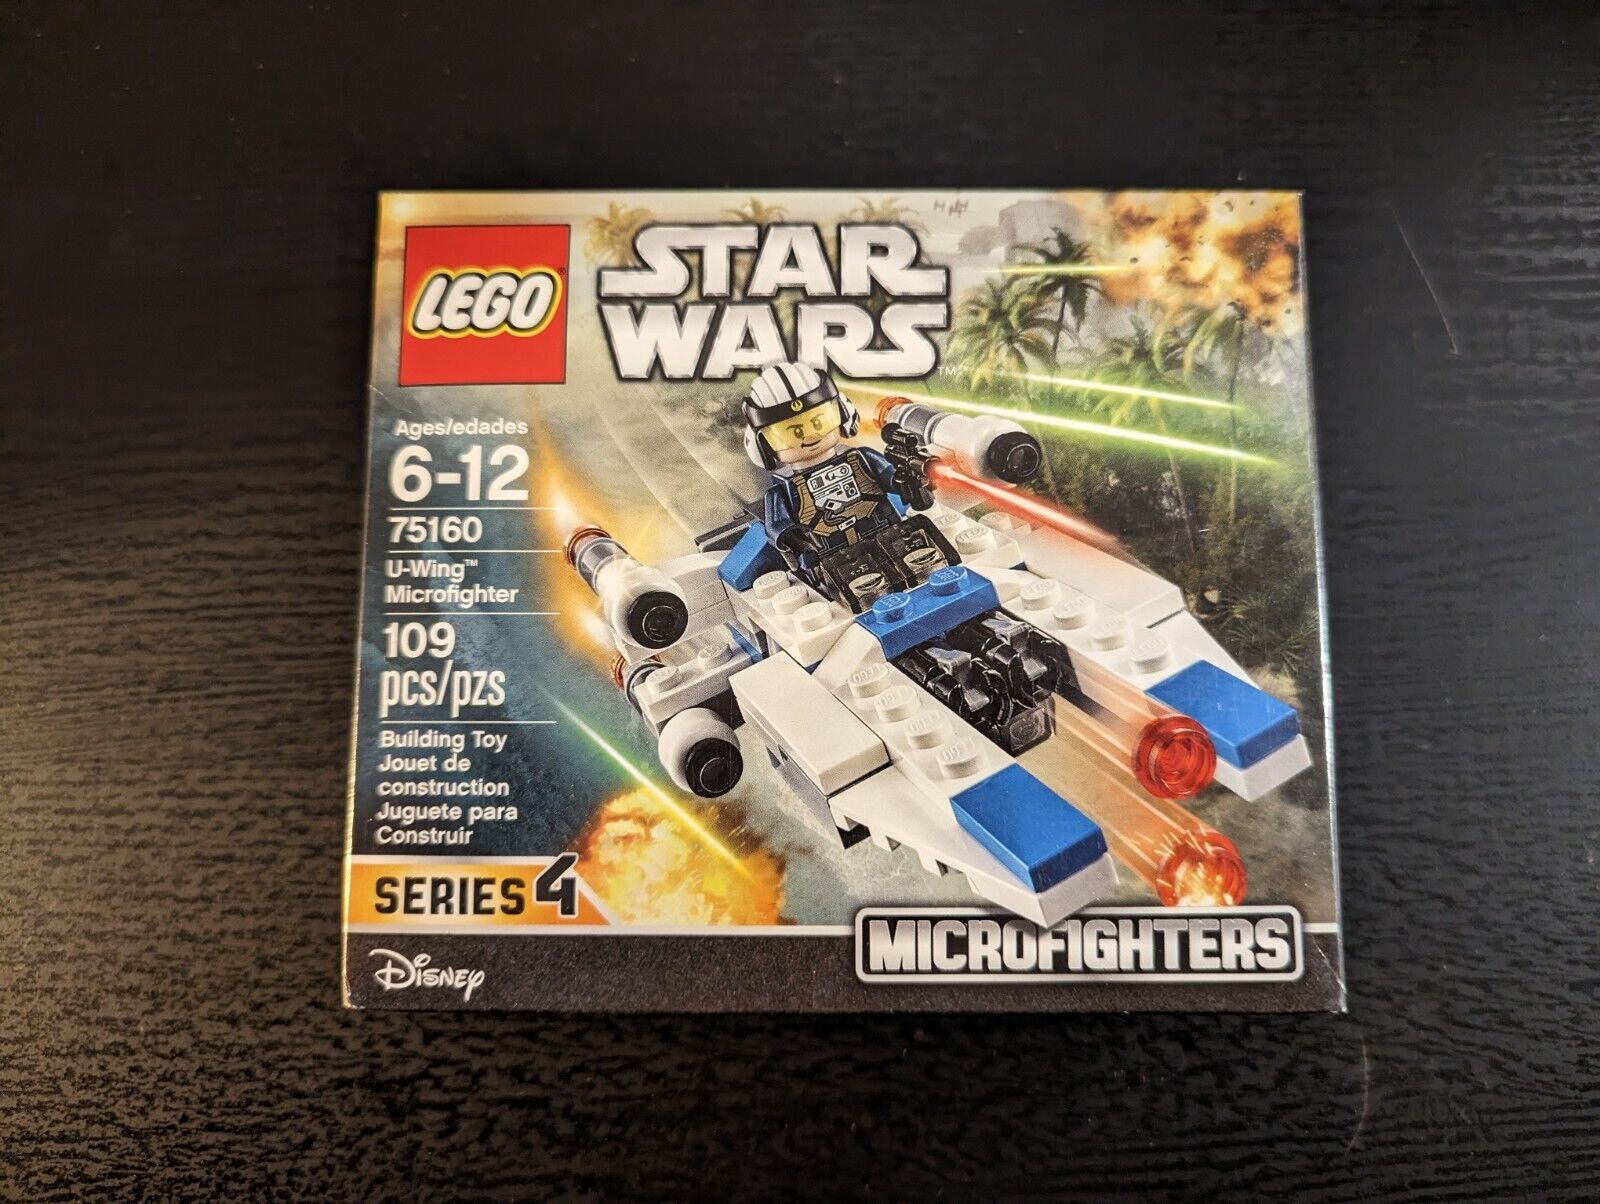 LEGO 75160 - Star Wars - U-Wing Microfighter - New Sealed In Box